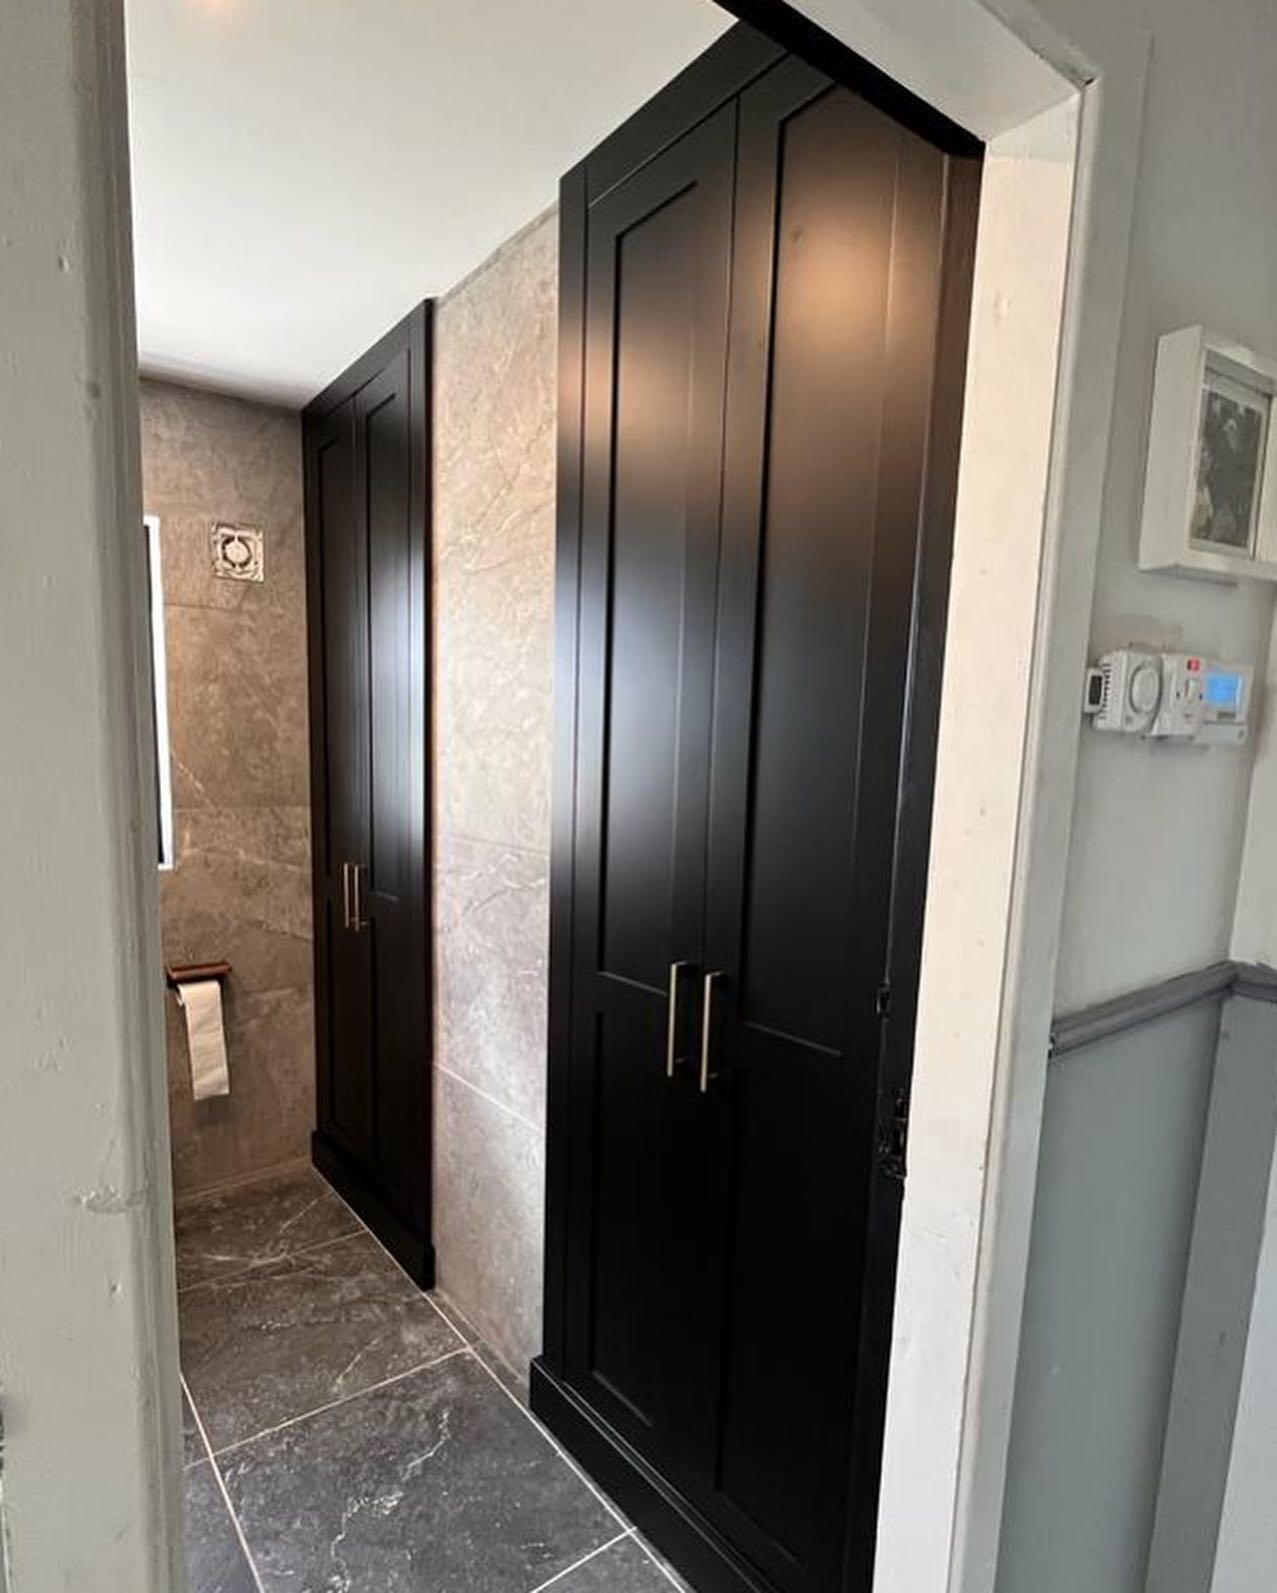 This weeks transformation- swipe for before ➡️➡️
This customer wanted to transform and modernise this storage space in their bathroom, so we did just that. 

They went with a Matt Black spray finish on the doors with a nice gold bar handle to match, 